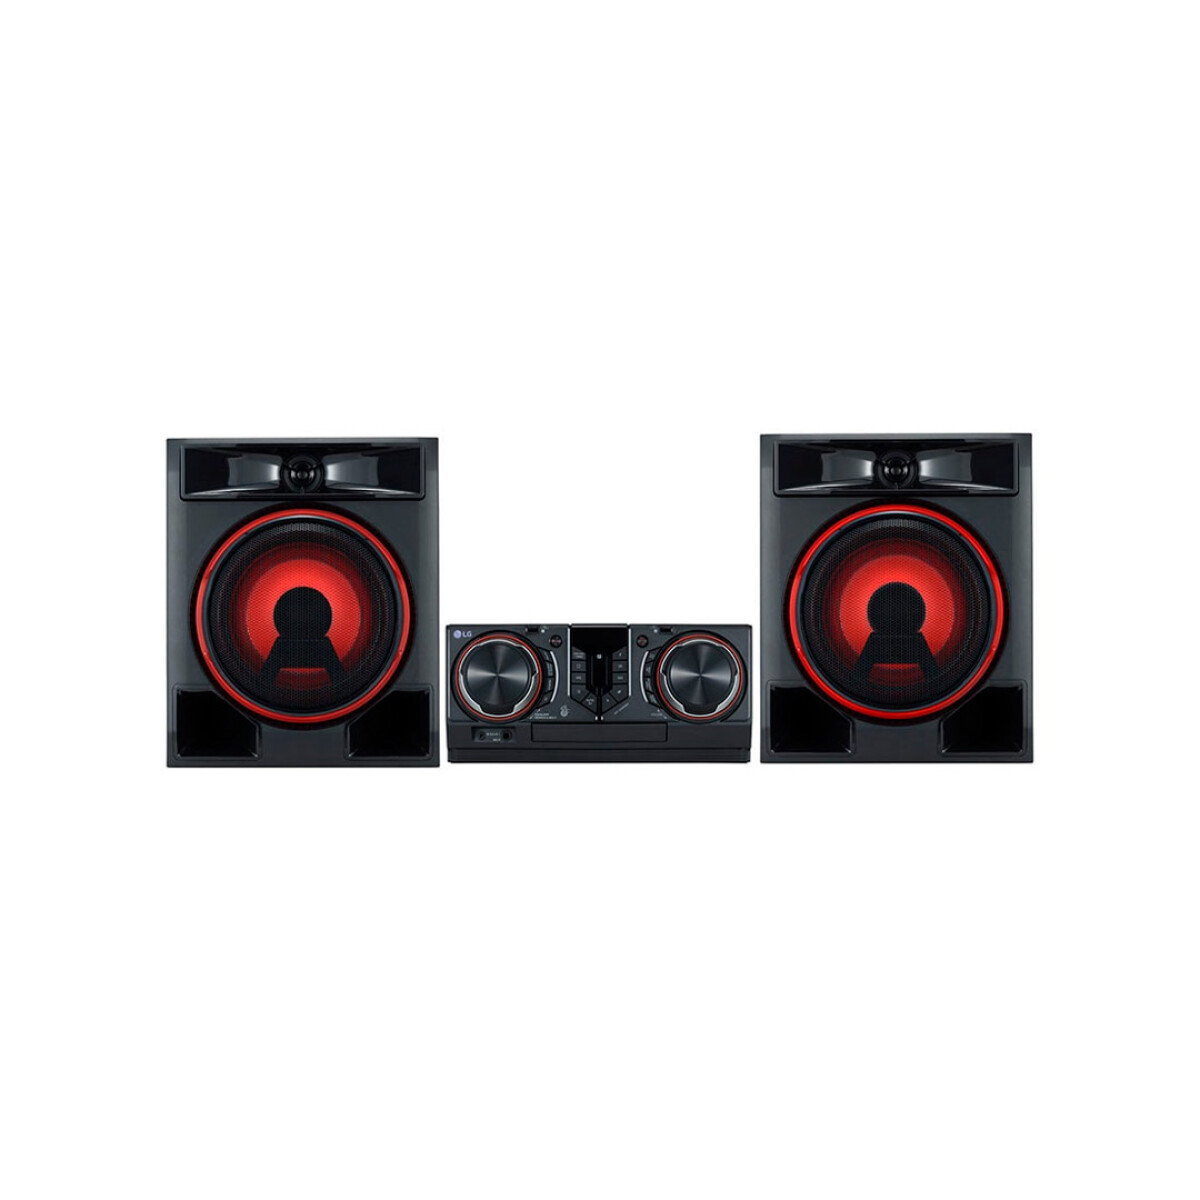 Minicomponente Lg Xboom Cl 65 950 Wts Rms Bluetooth - 001 